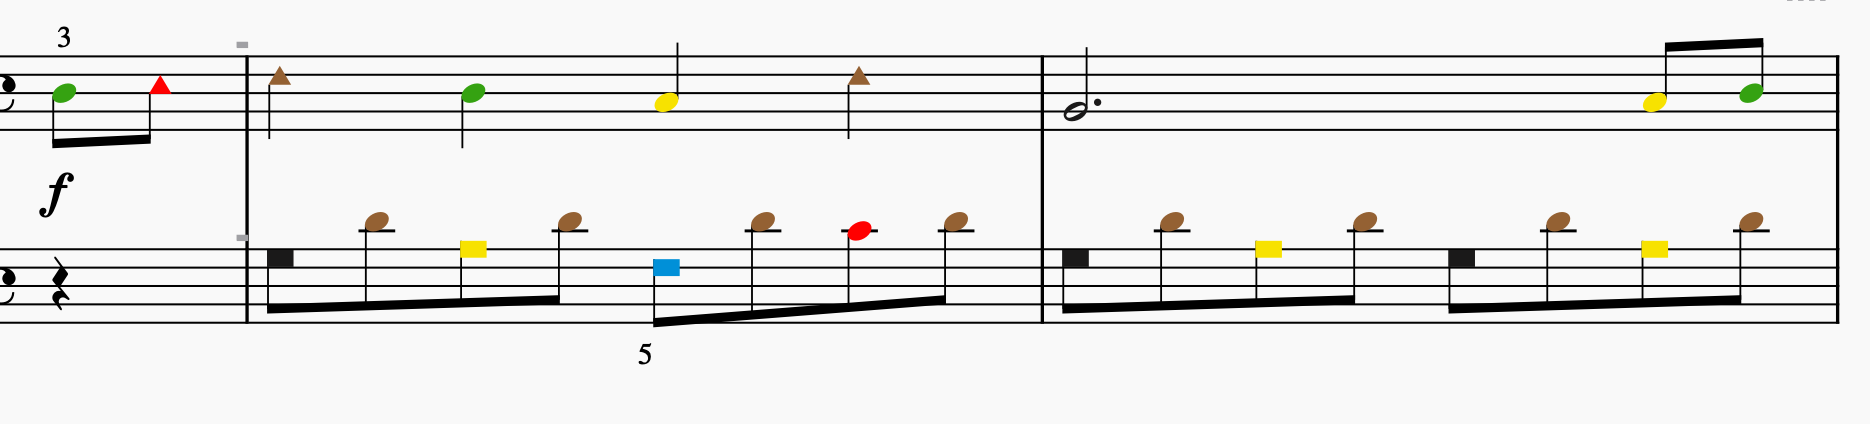 A few bars of a piano score. The noteheads are the colours and shapes of Figurenotes, but everything else is standard notation.